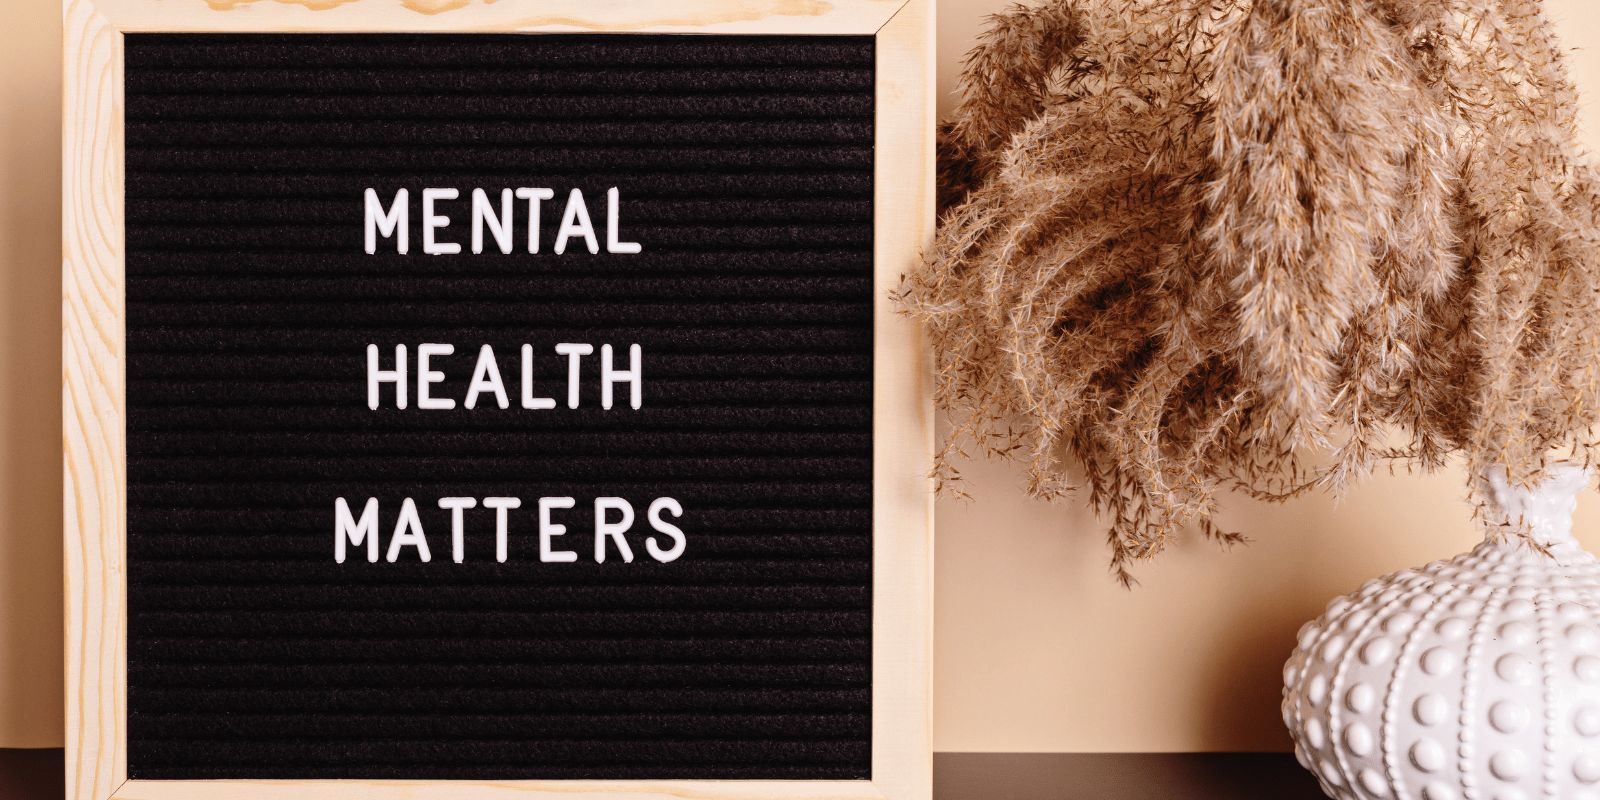 Mind Matters: The Crucial Importance of Mental Health and Wellbeing at Work